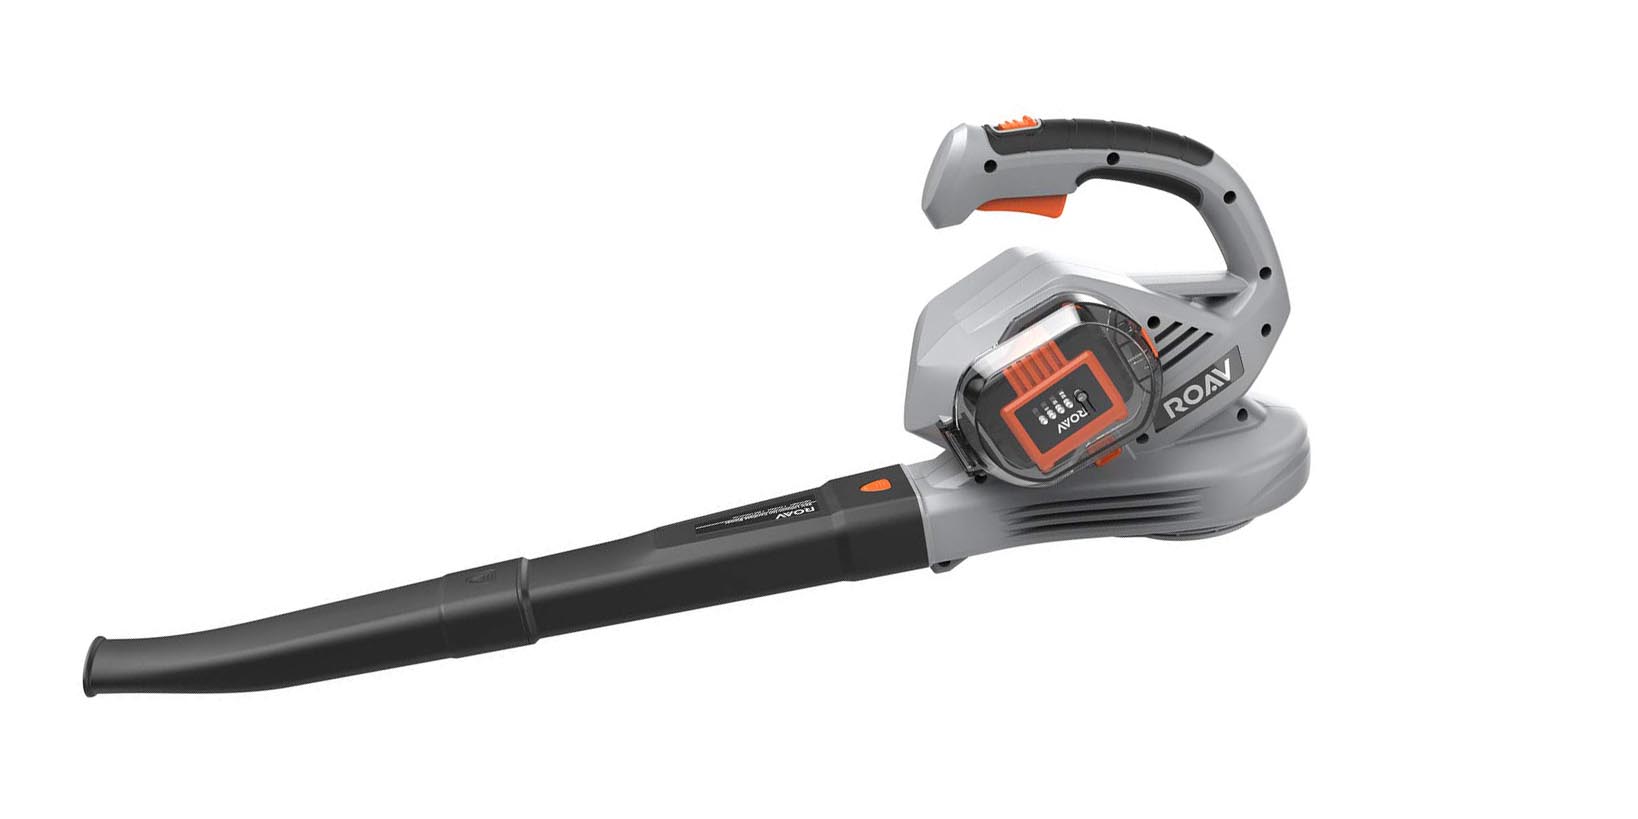 Pick up an Anker cordless electric leaf blower for $120 (Reg. $150), more